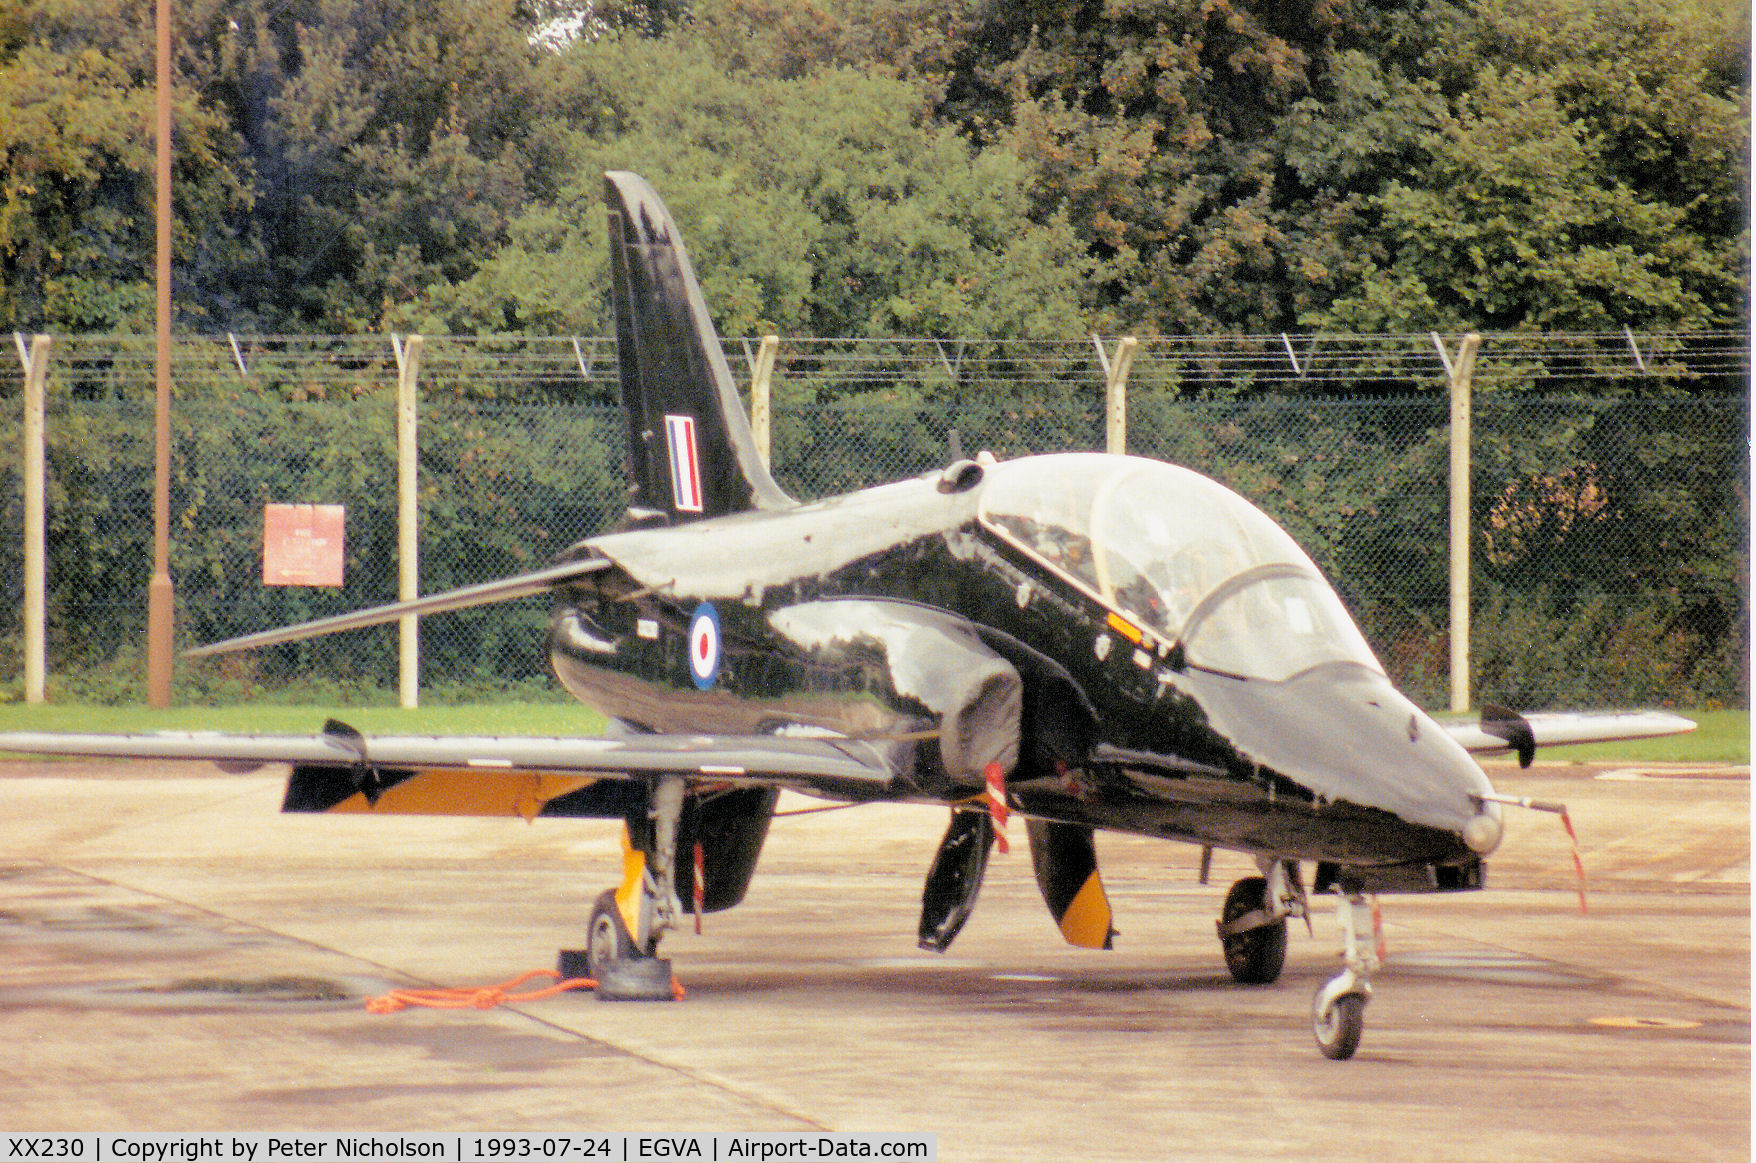 XX230, 1978 Hawker Siddeley Hawk T.1A C/N 066/312066, Hawk T.1A of 19[Reserve] Squadron at RAF Chivenor on the flight-line at the 1993 Intnl Air Tattoo at RAF Fairford.